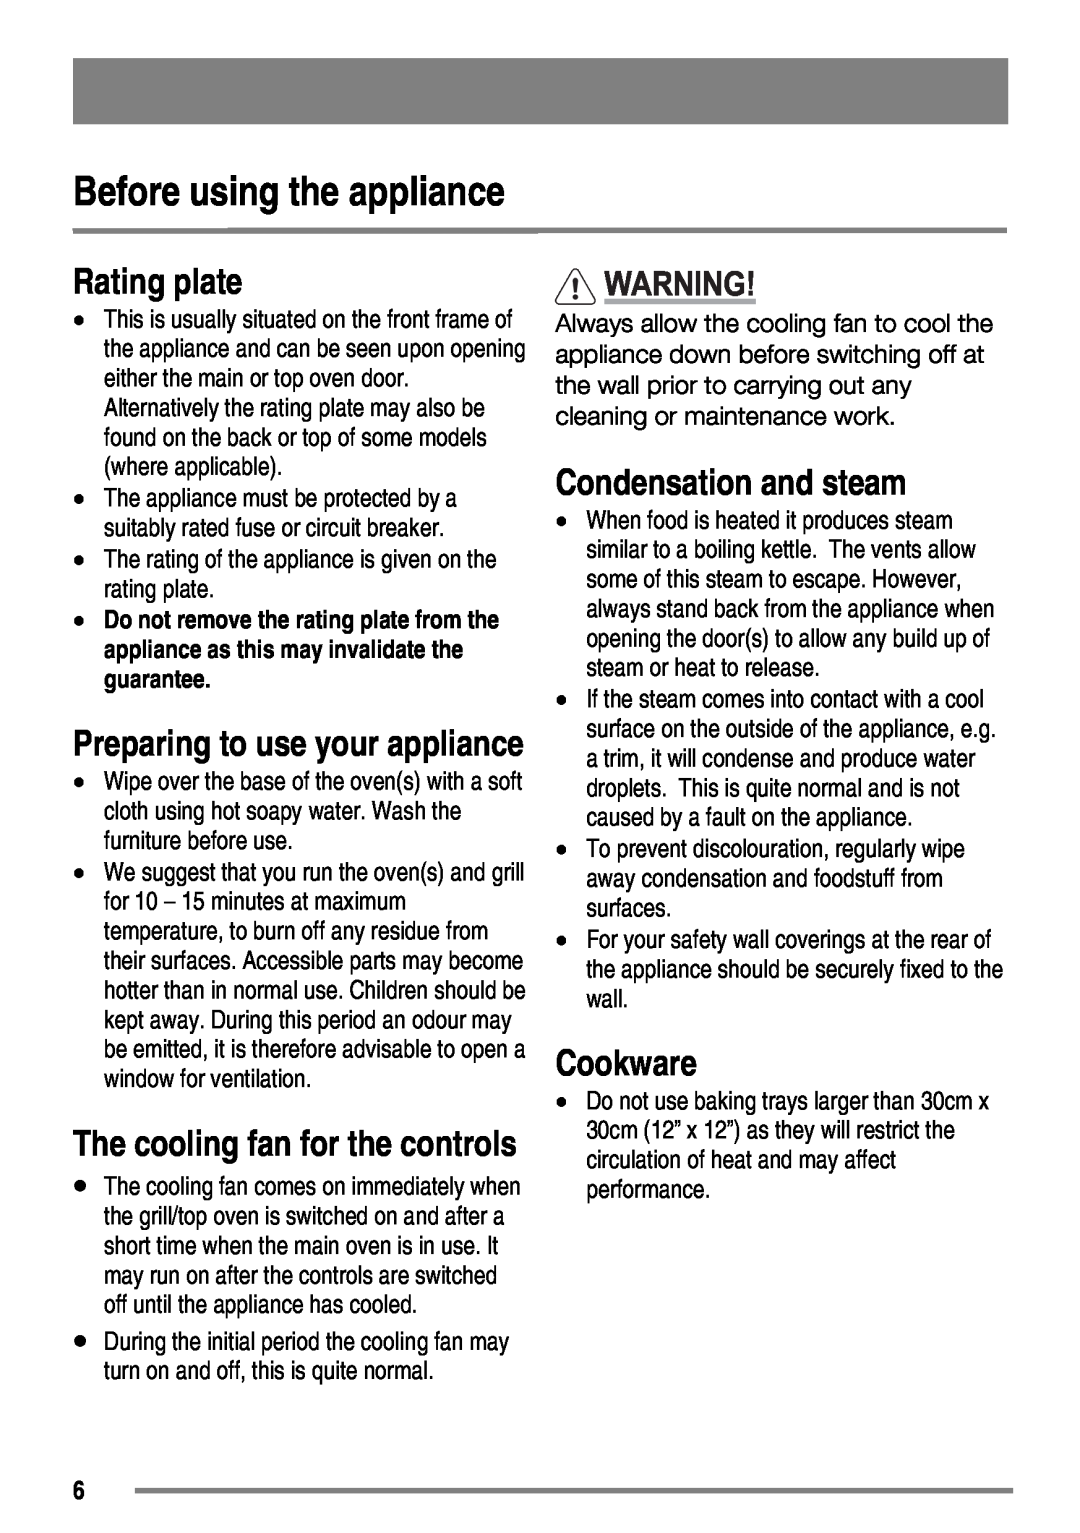 Zanussi ZKG6020 user manual Before using the appliance, Rating plate, Cookware, The cooling fan for the controls 